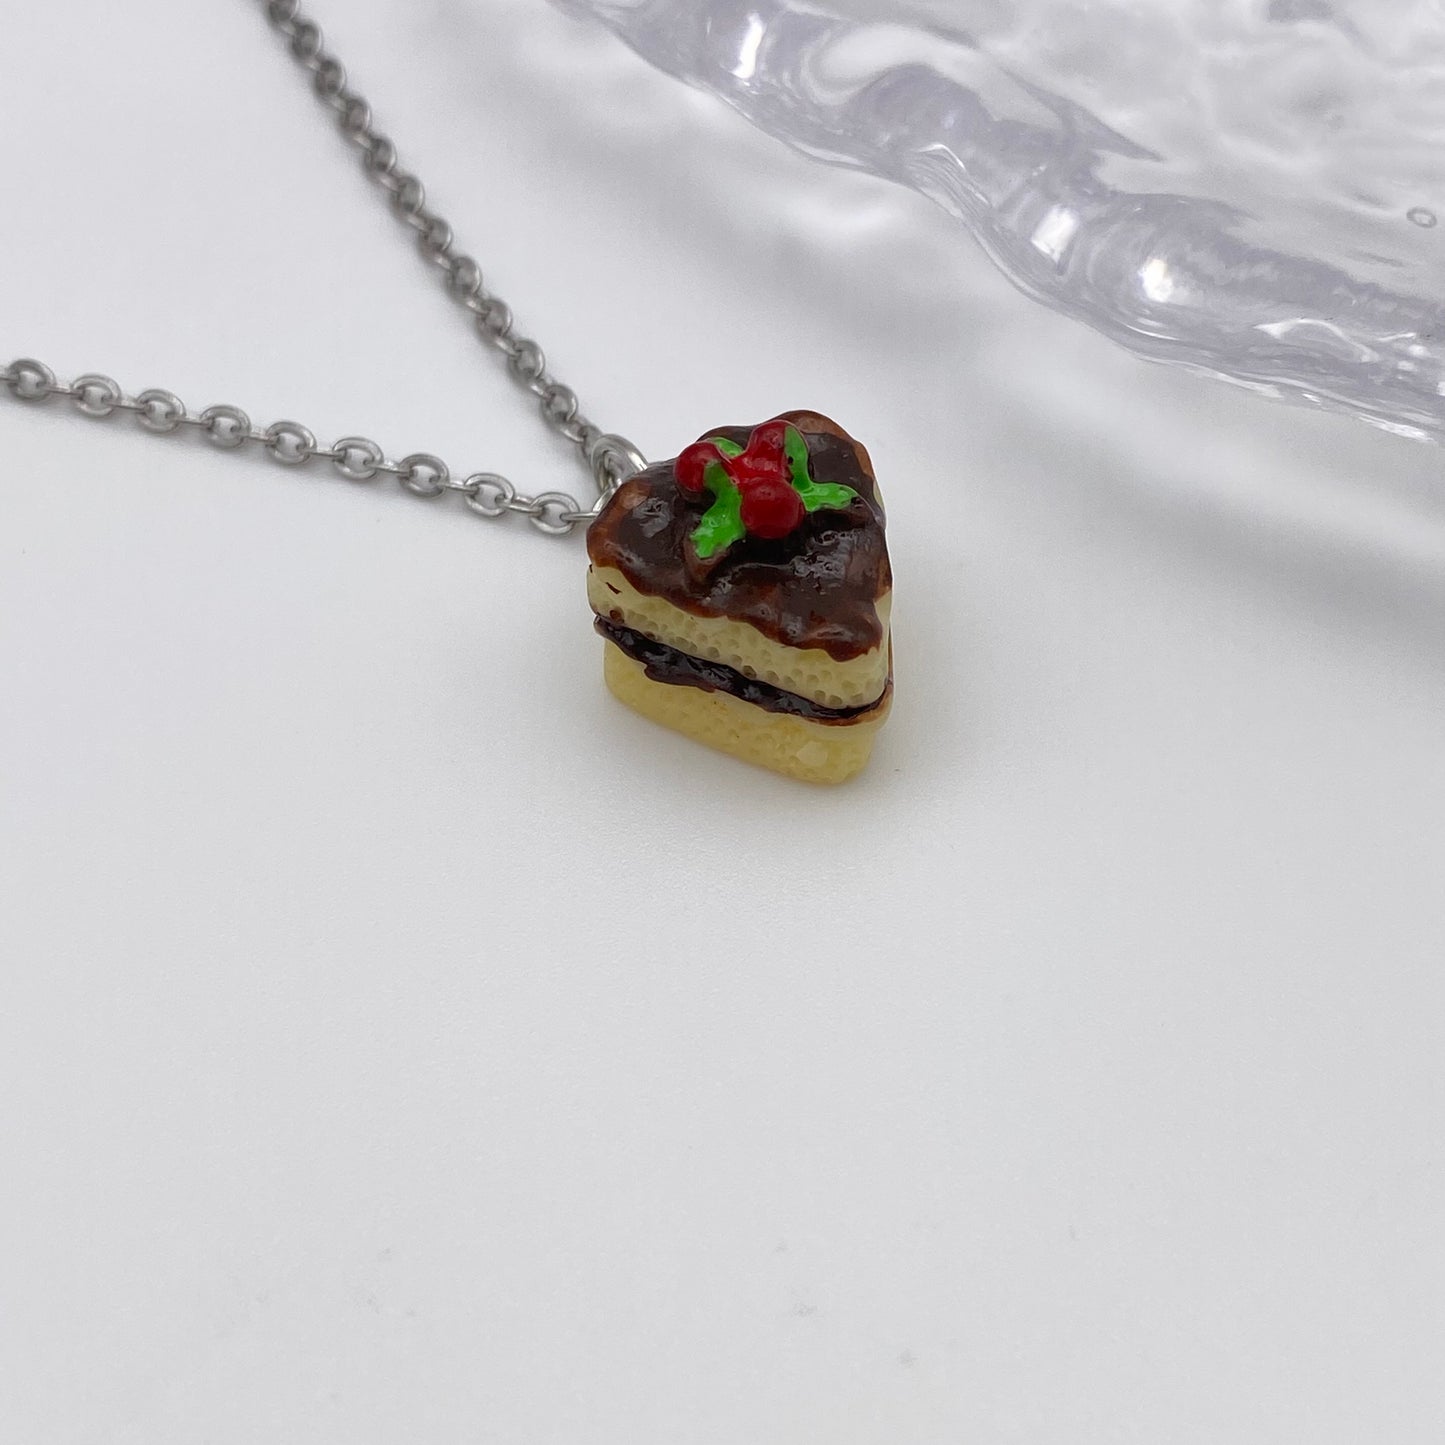 Cherry Topped Cake Slice Necklace